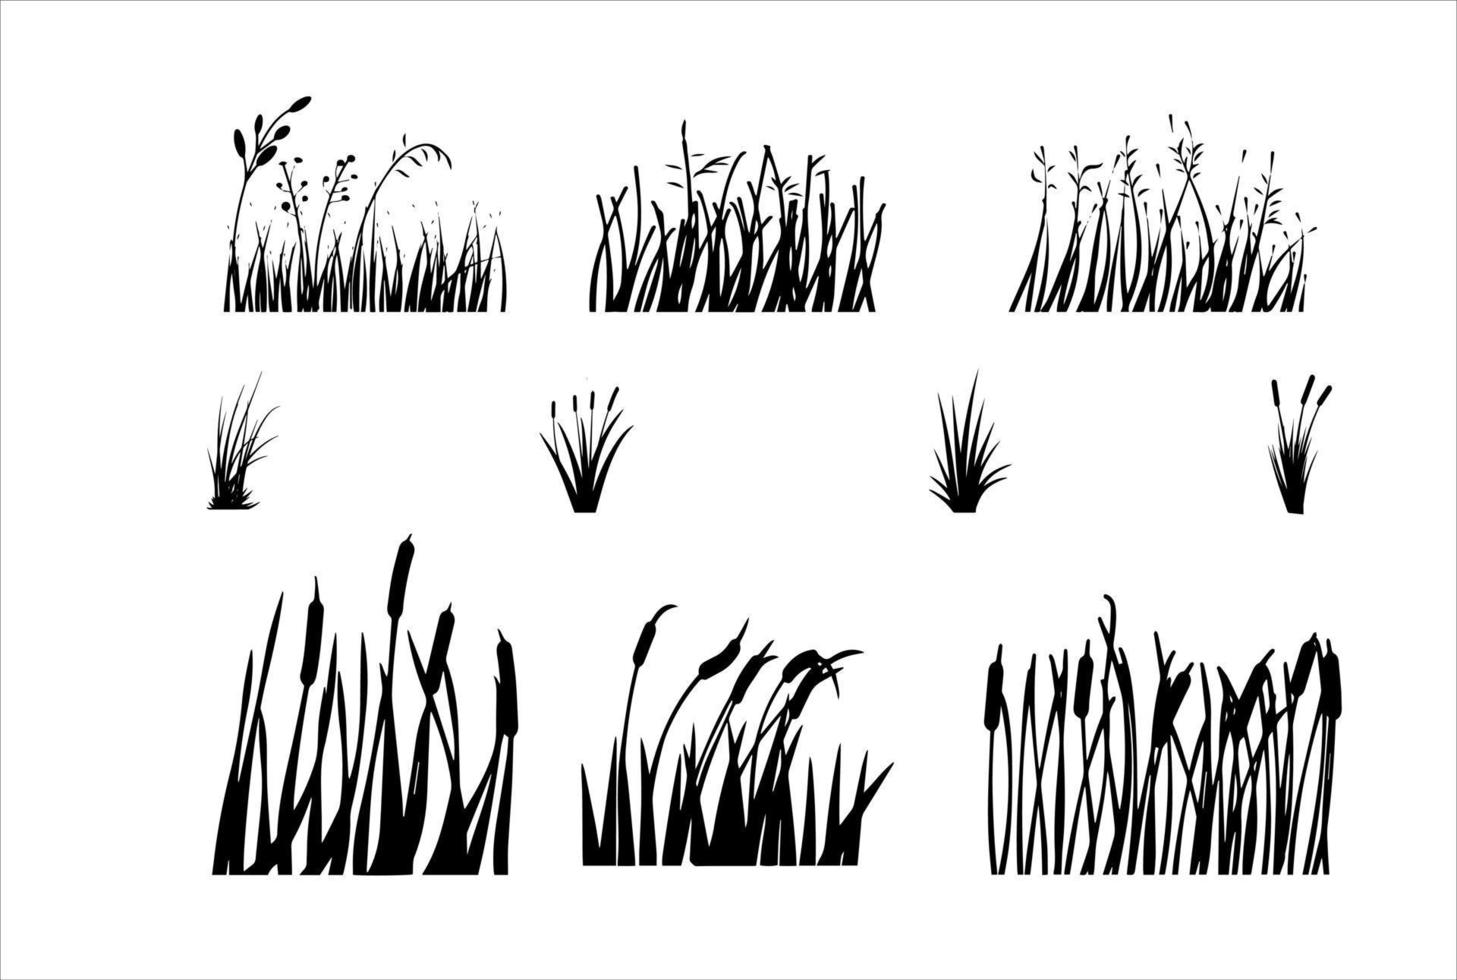 Collection of Mix Grass and Weeds in Silhouette Illustrations vector